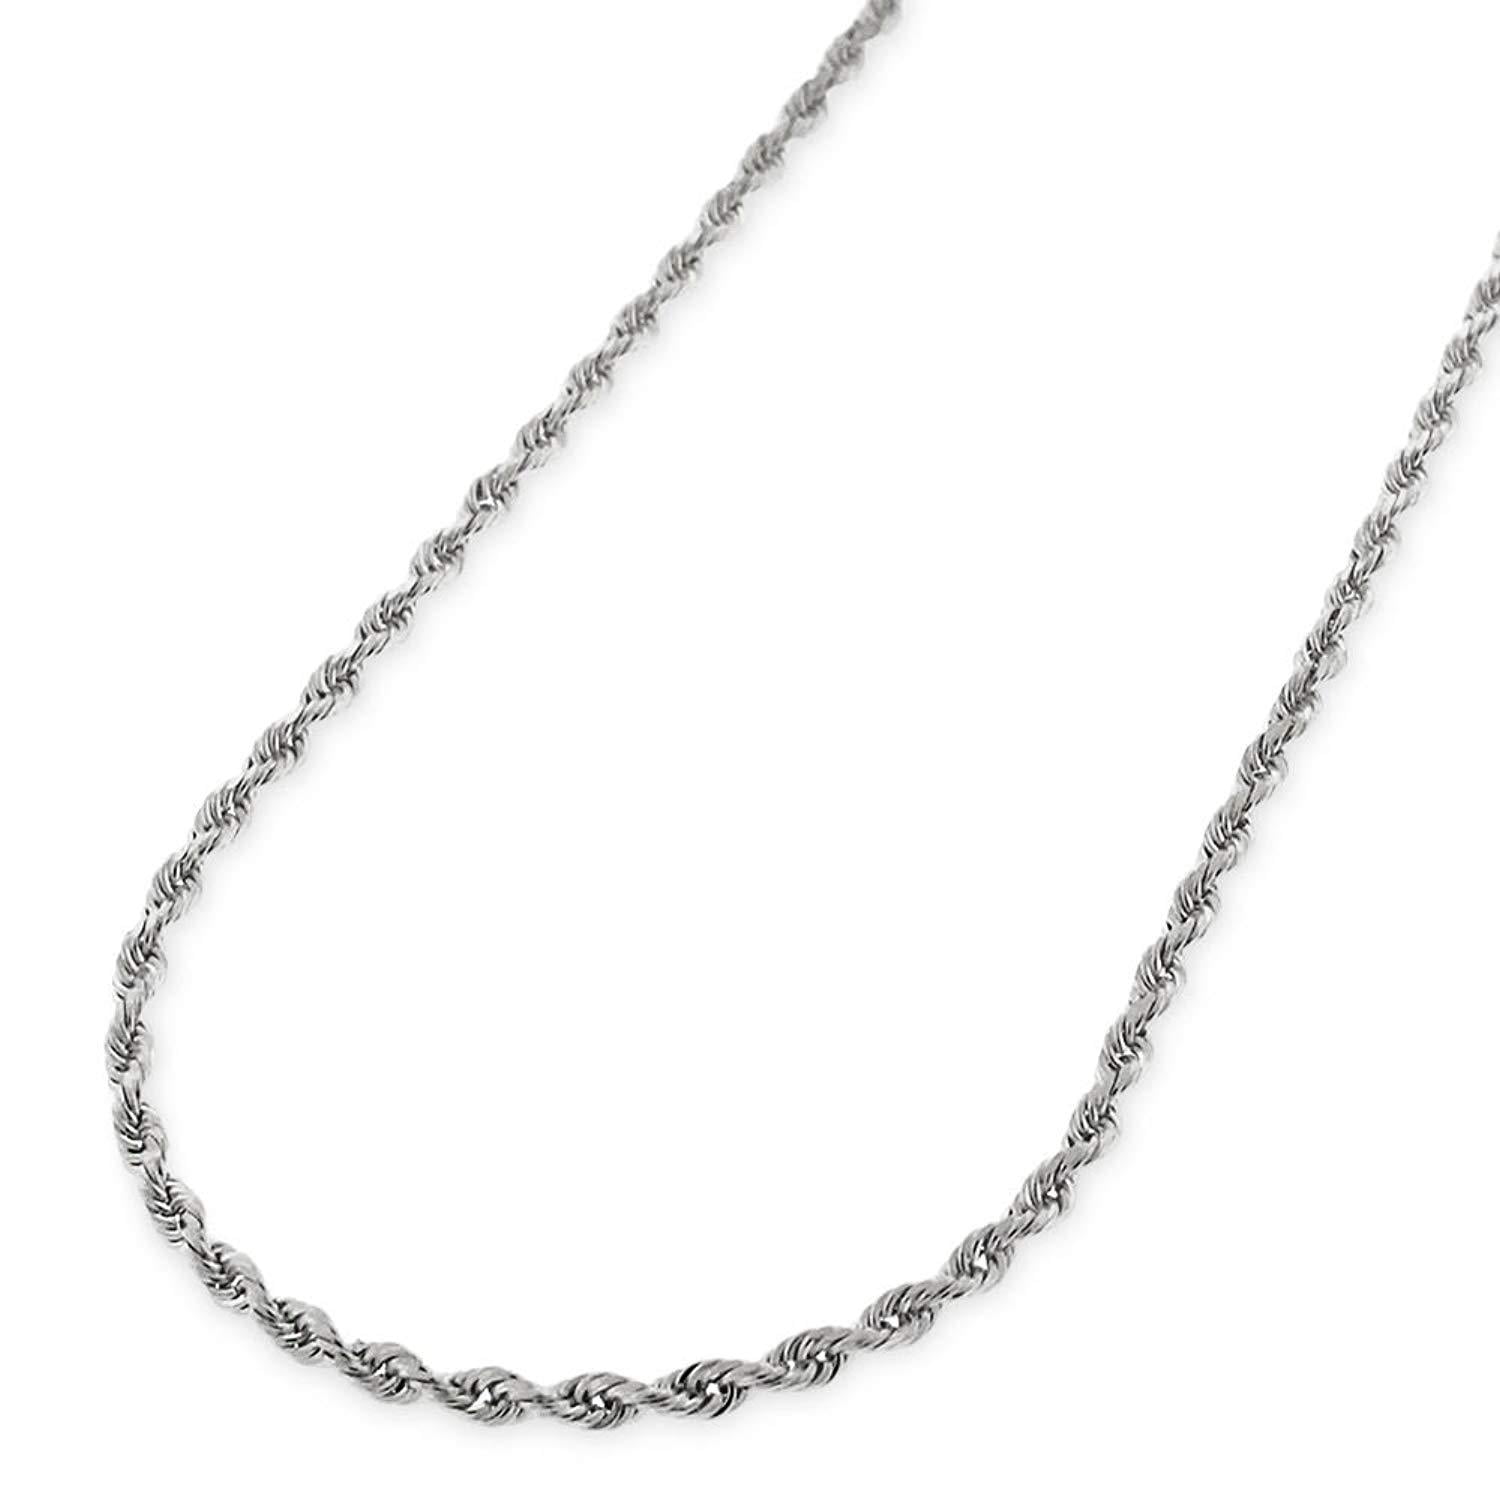 14K SOLID WHITE GOLD Diamond Cut Rope Necklace Chain 1.5mm 16-24" Link Women Men